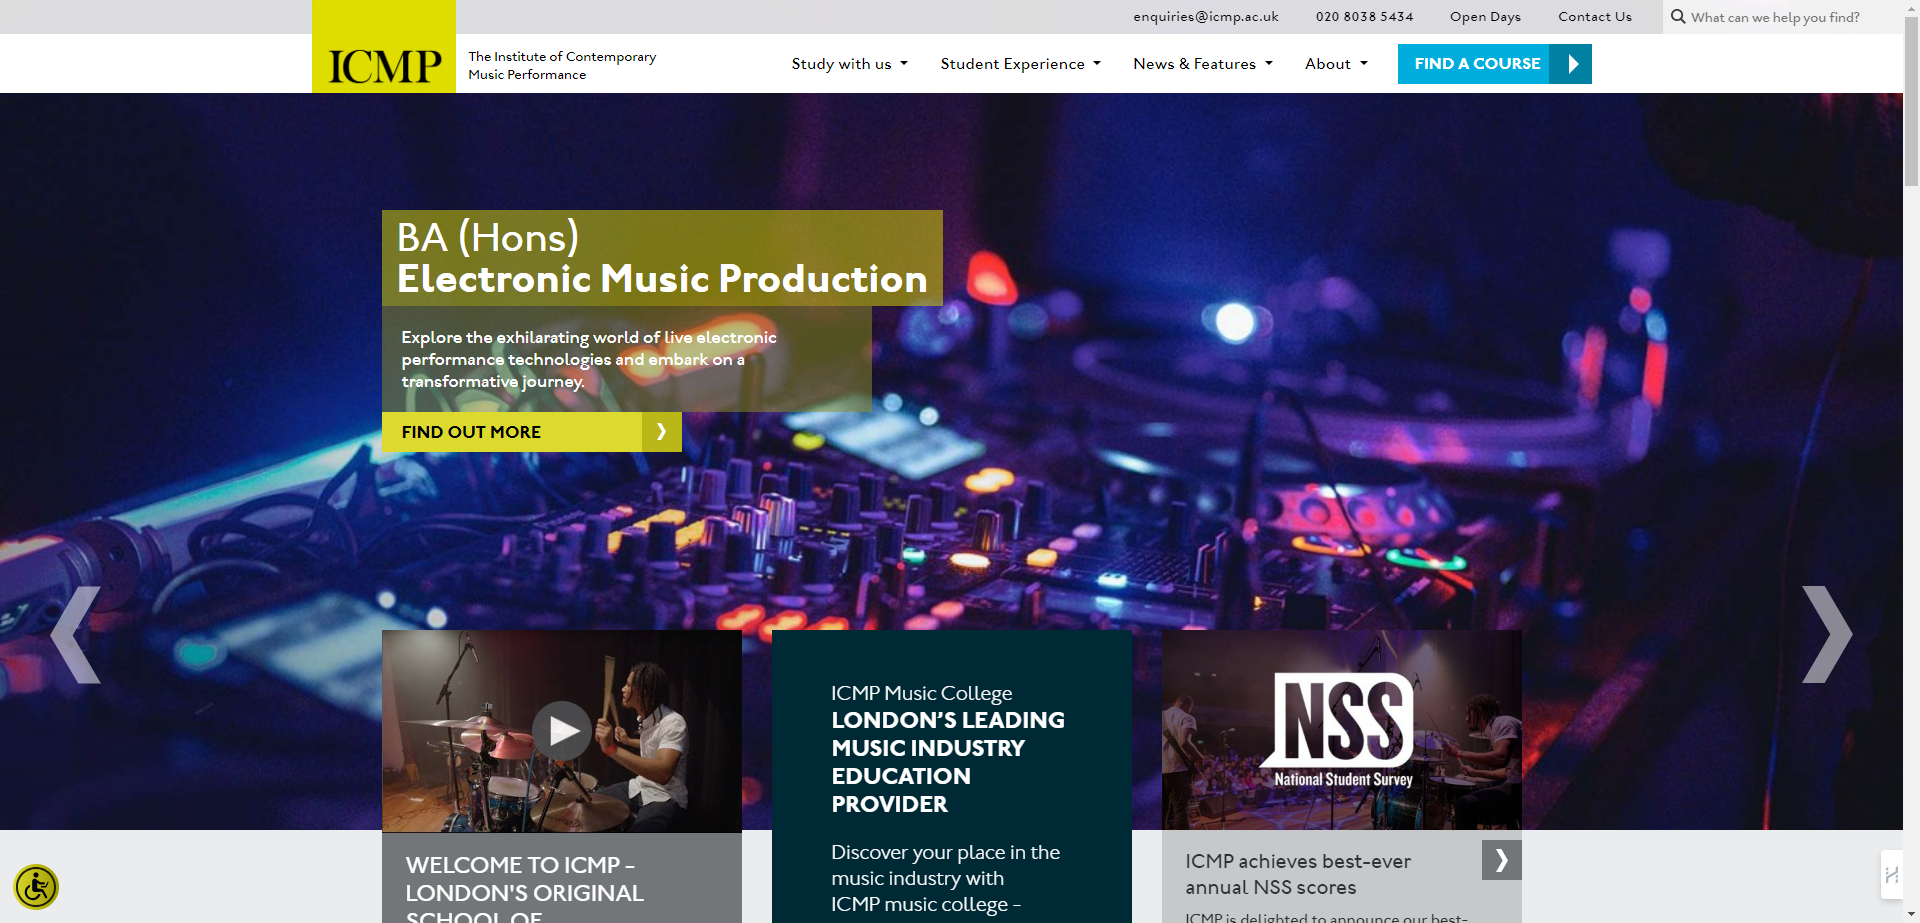 ICMP London a specialist Music Education Provider